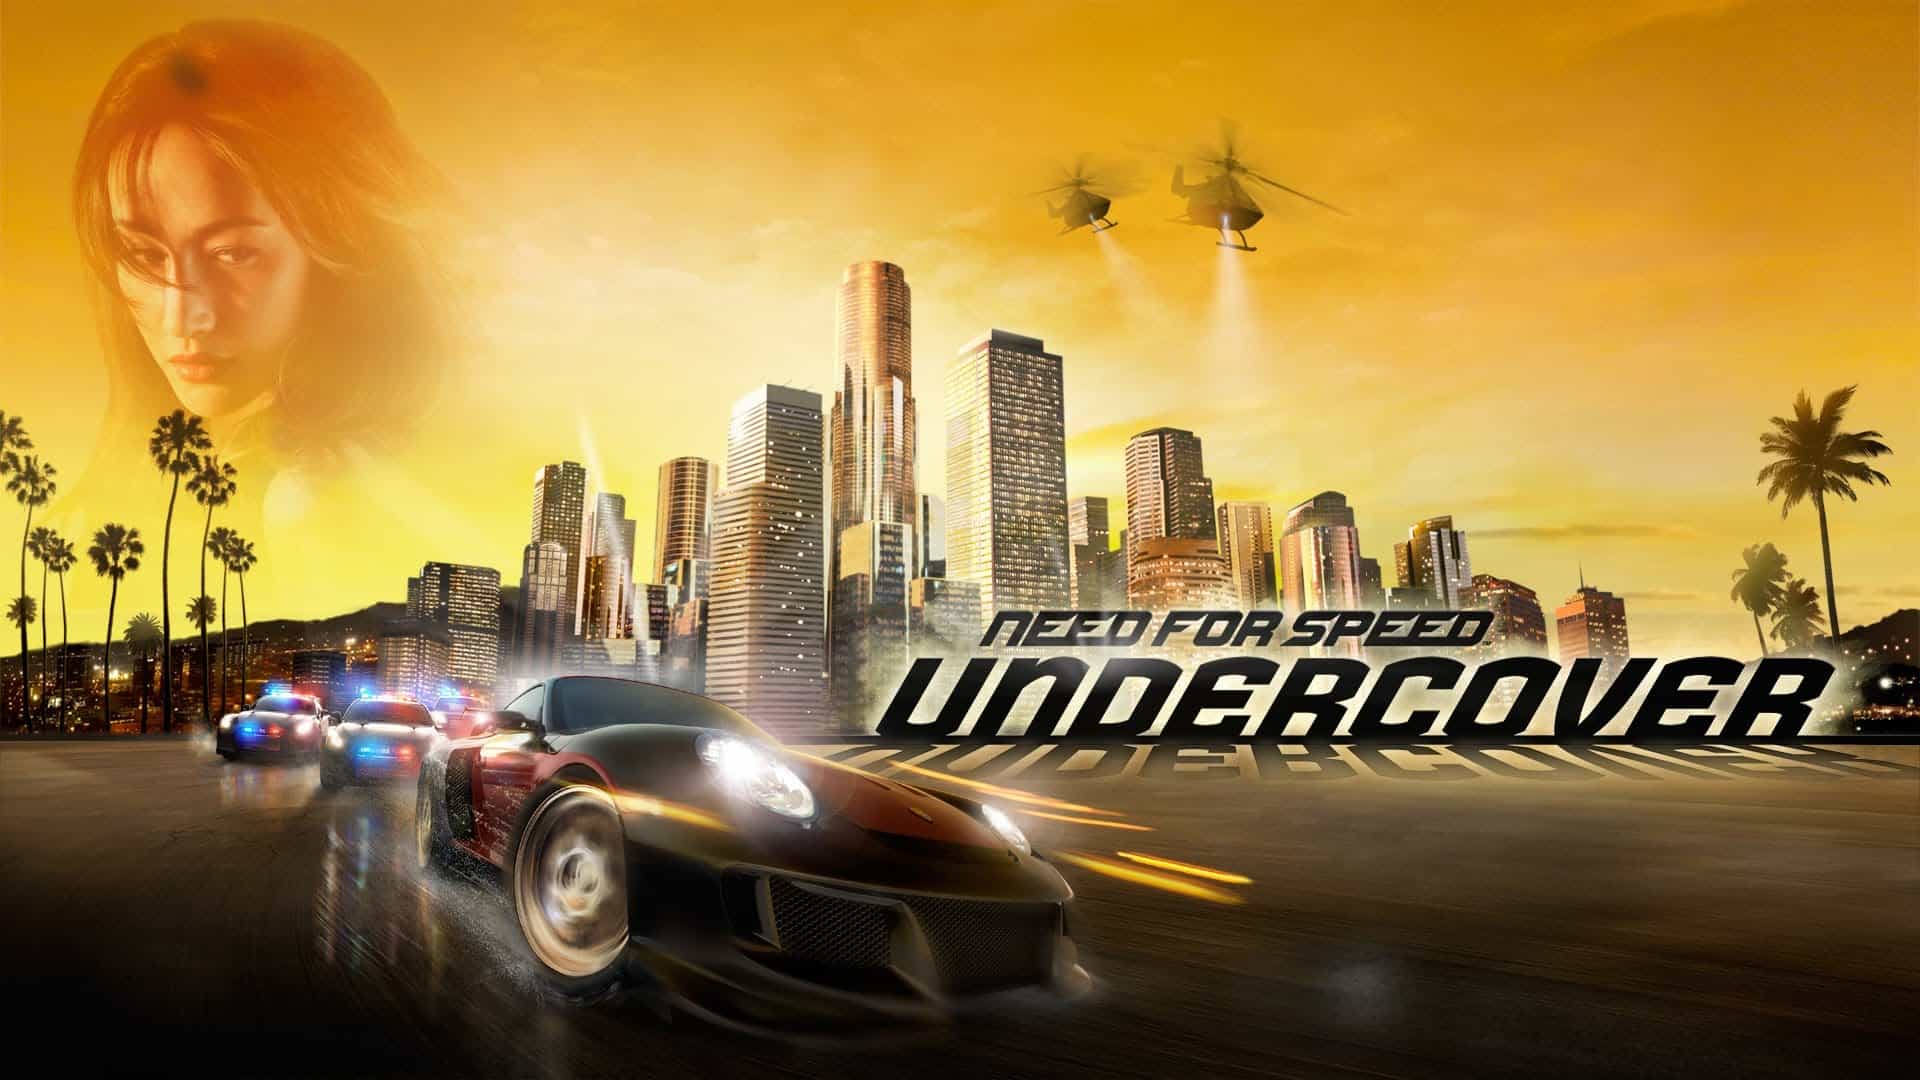 sauvegarde need for speed undercover pc